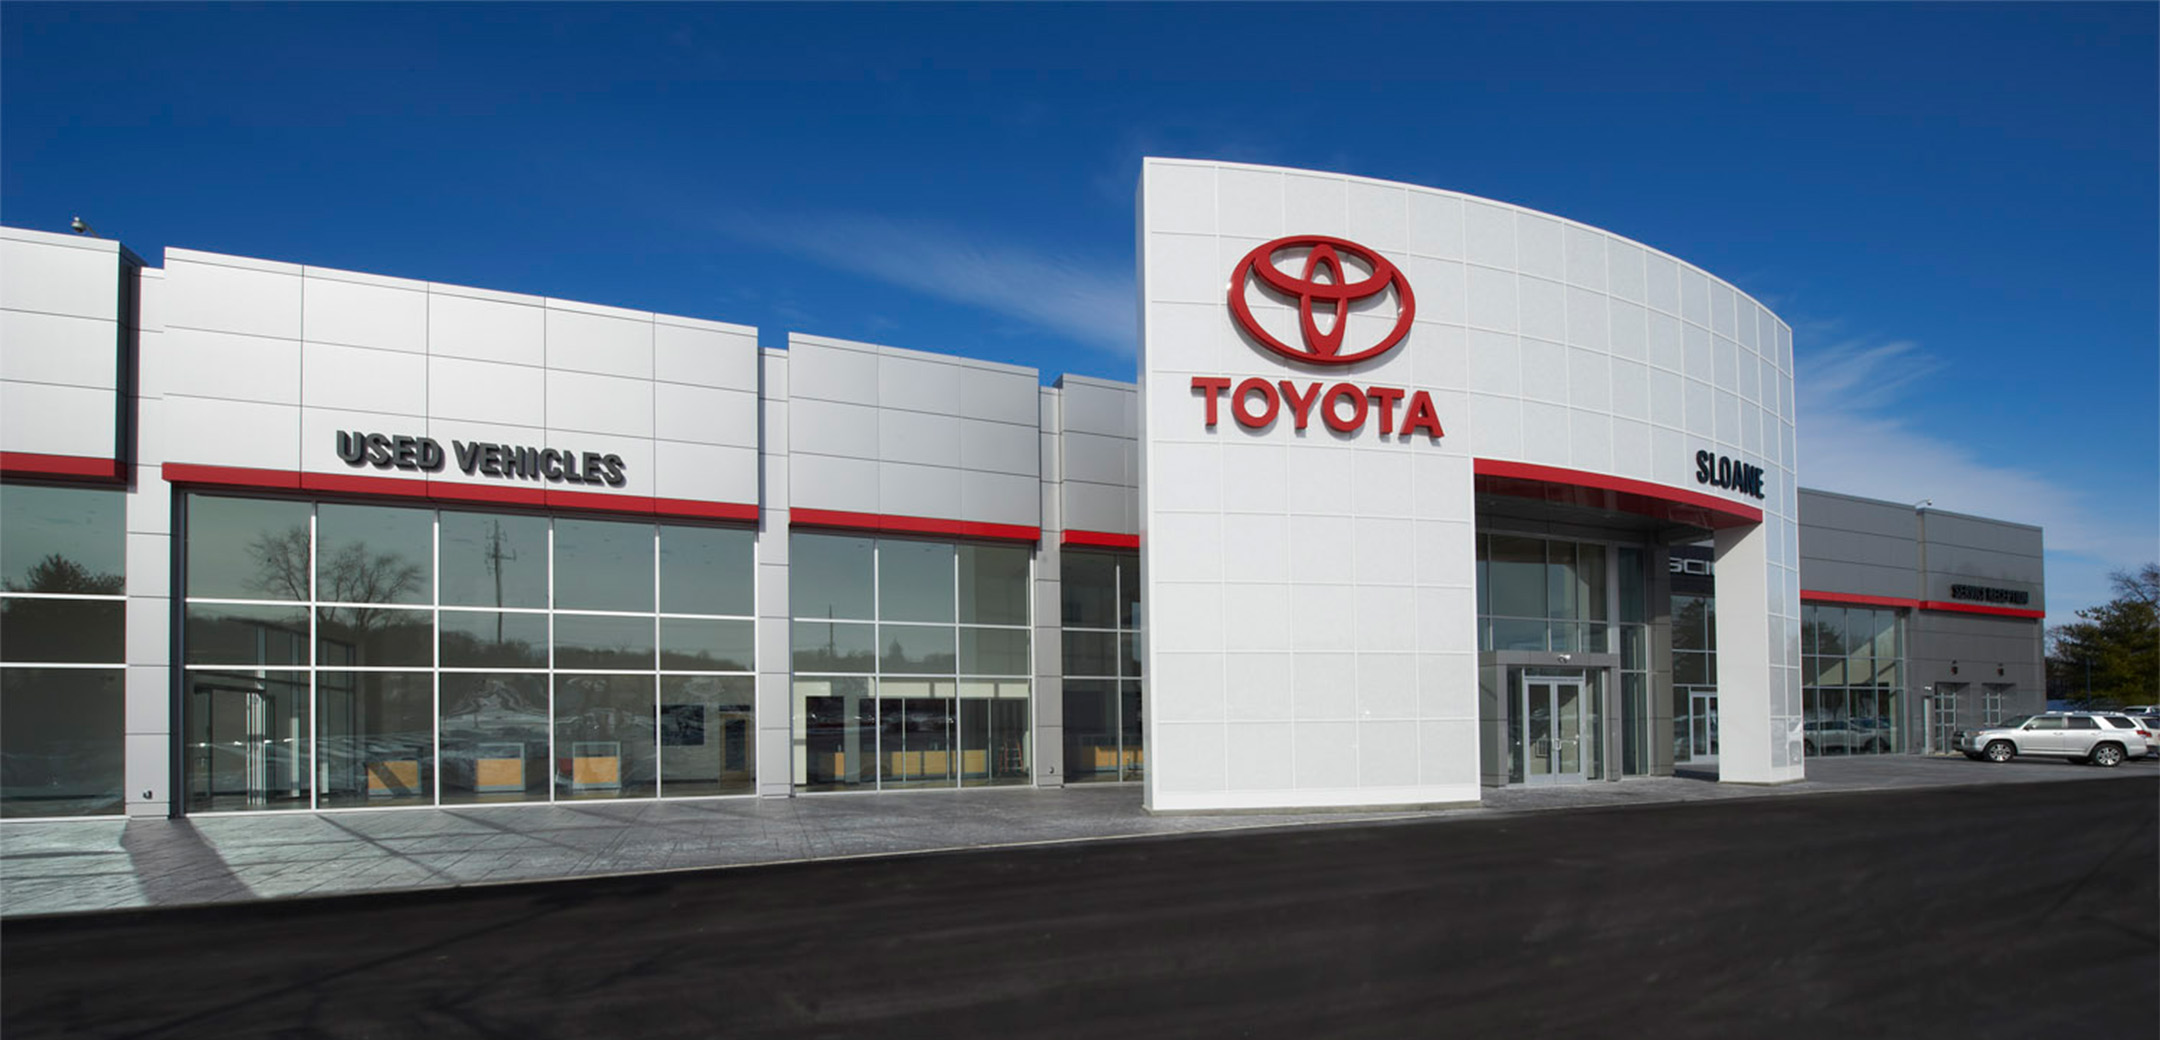 An exterior view of the Sloane modern grey panel building with the ``Toyota`` signage and logo on the front with large showcase windows peering inside.